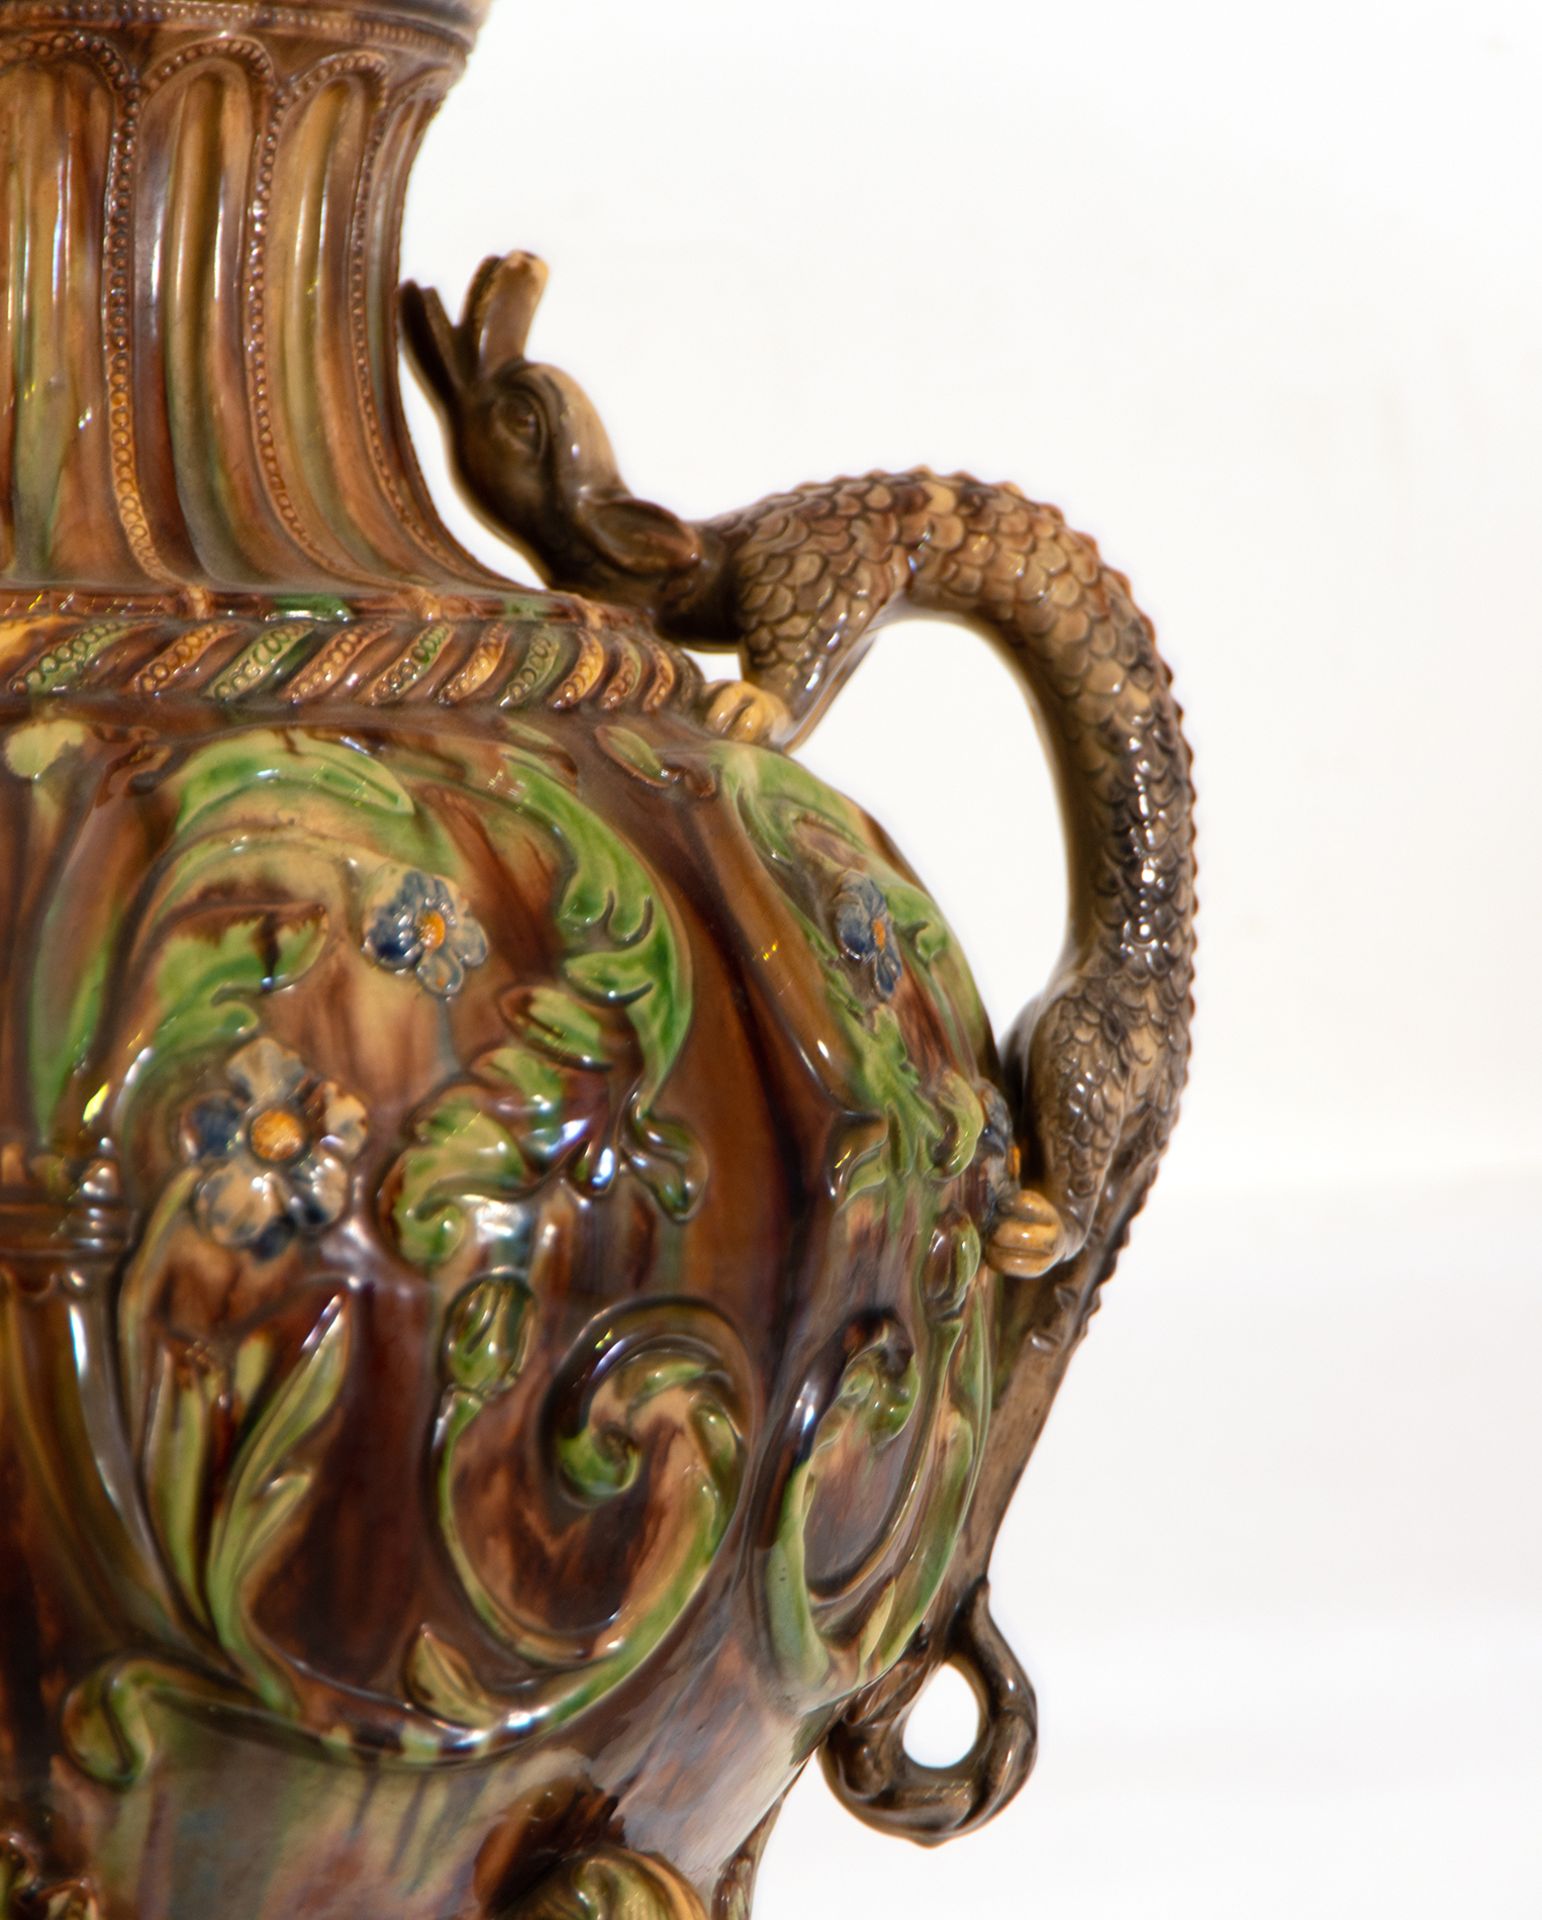 Ewer in enameled stoneware in the Art Nouveau style, French or Italian school of the 19th - 20th cen - Image 10 of 11